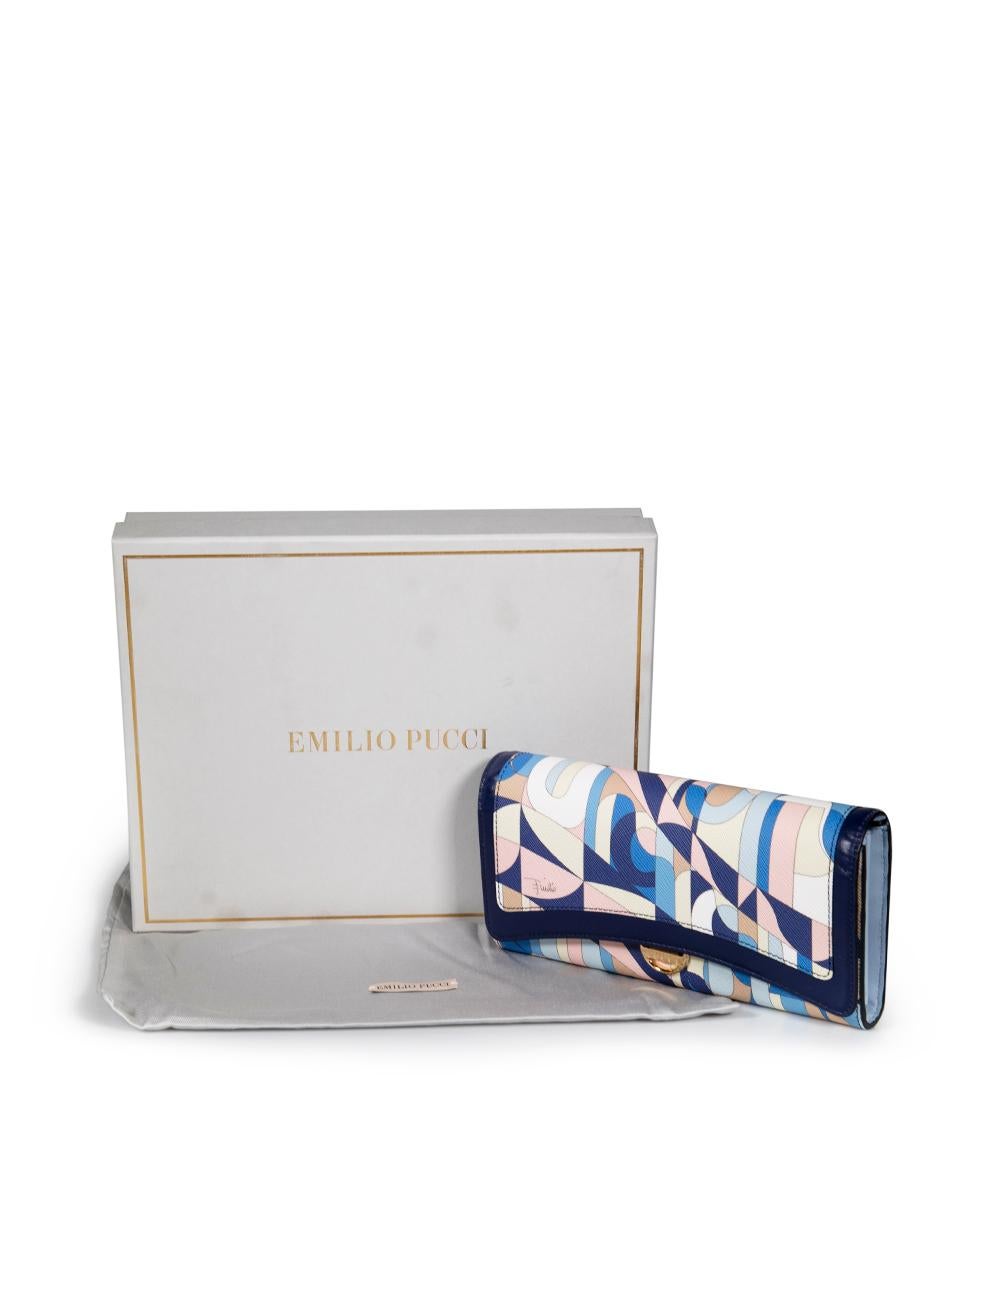 Emilio Pucci Blue Leather Abstract Pattern Long Wallet For Sale 3